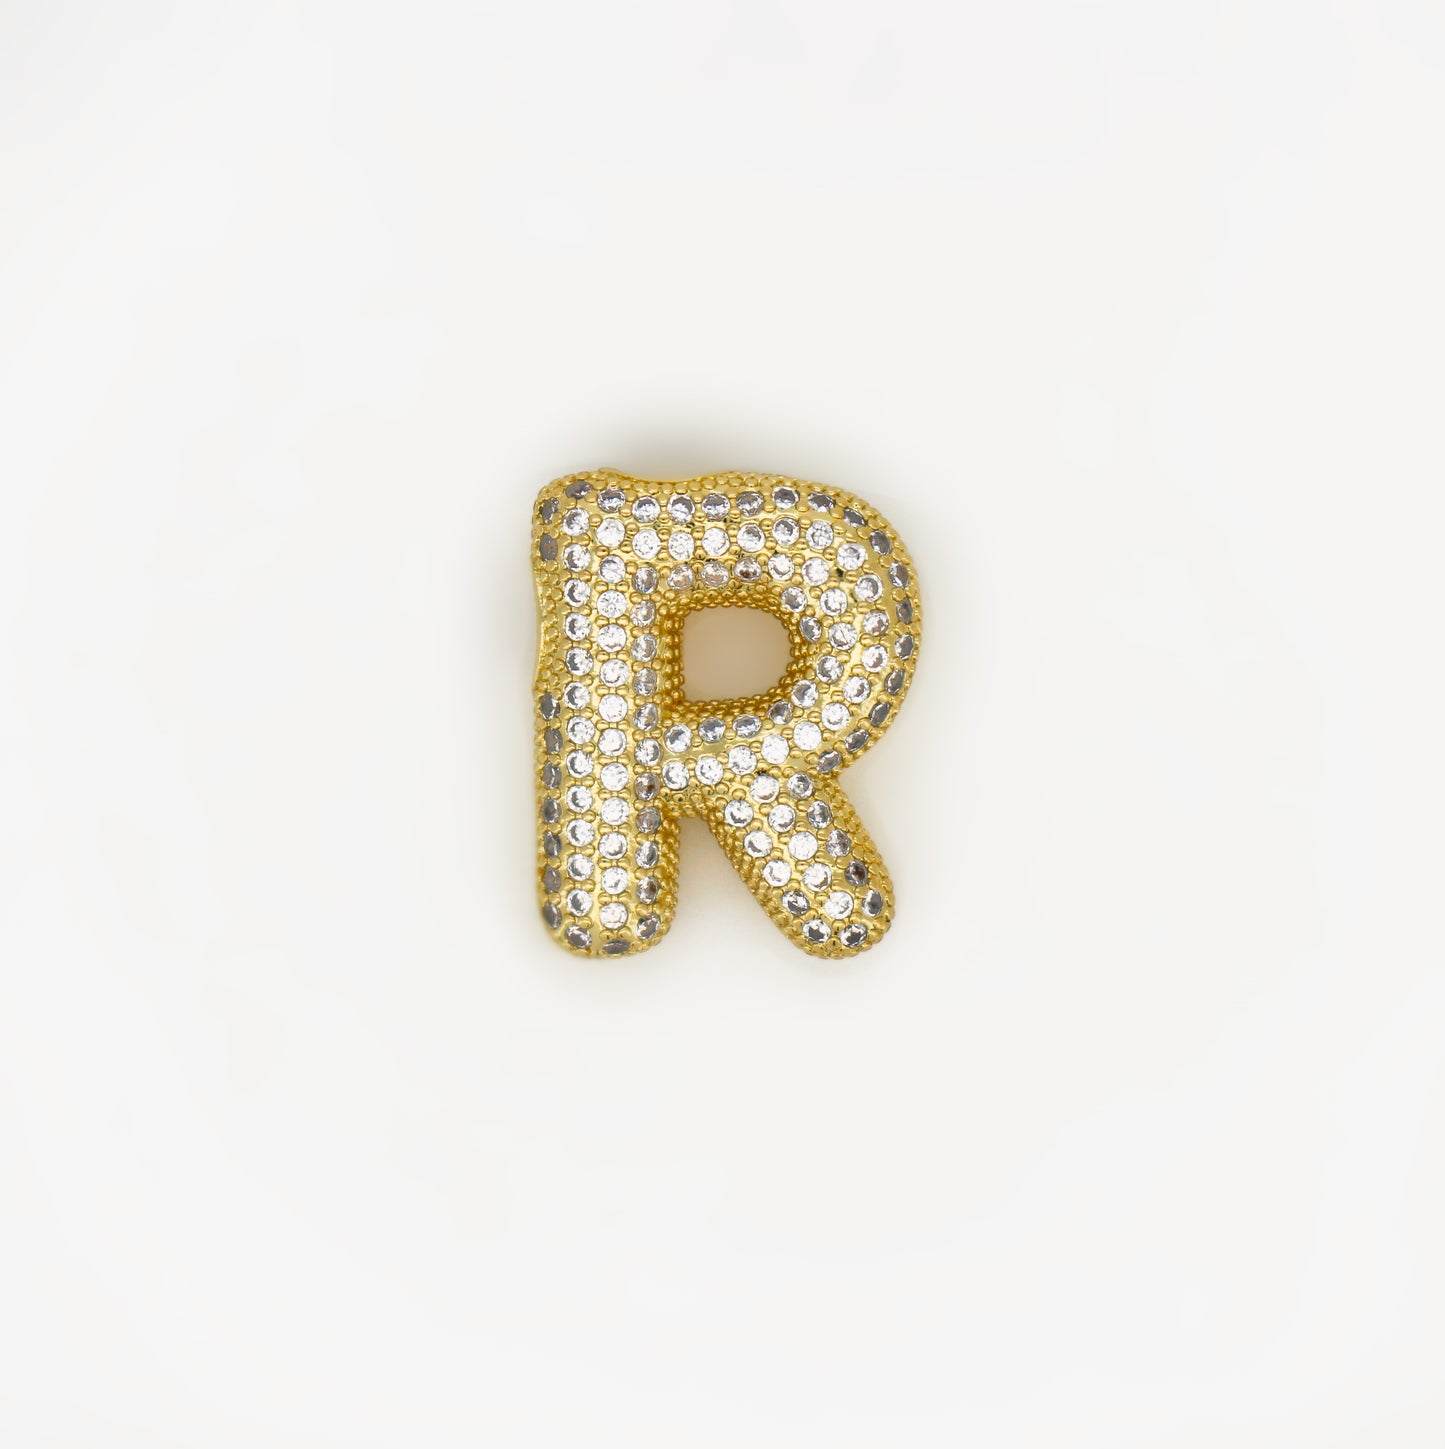 Chubby Balloon Initial Letter · 14K Gold Filled Chain Necklace · Initial Chunky Letter Pendant · Zircon letters · Gift for her · Besties